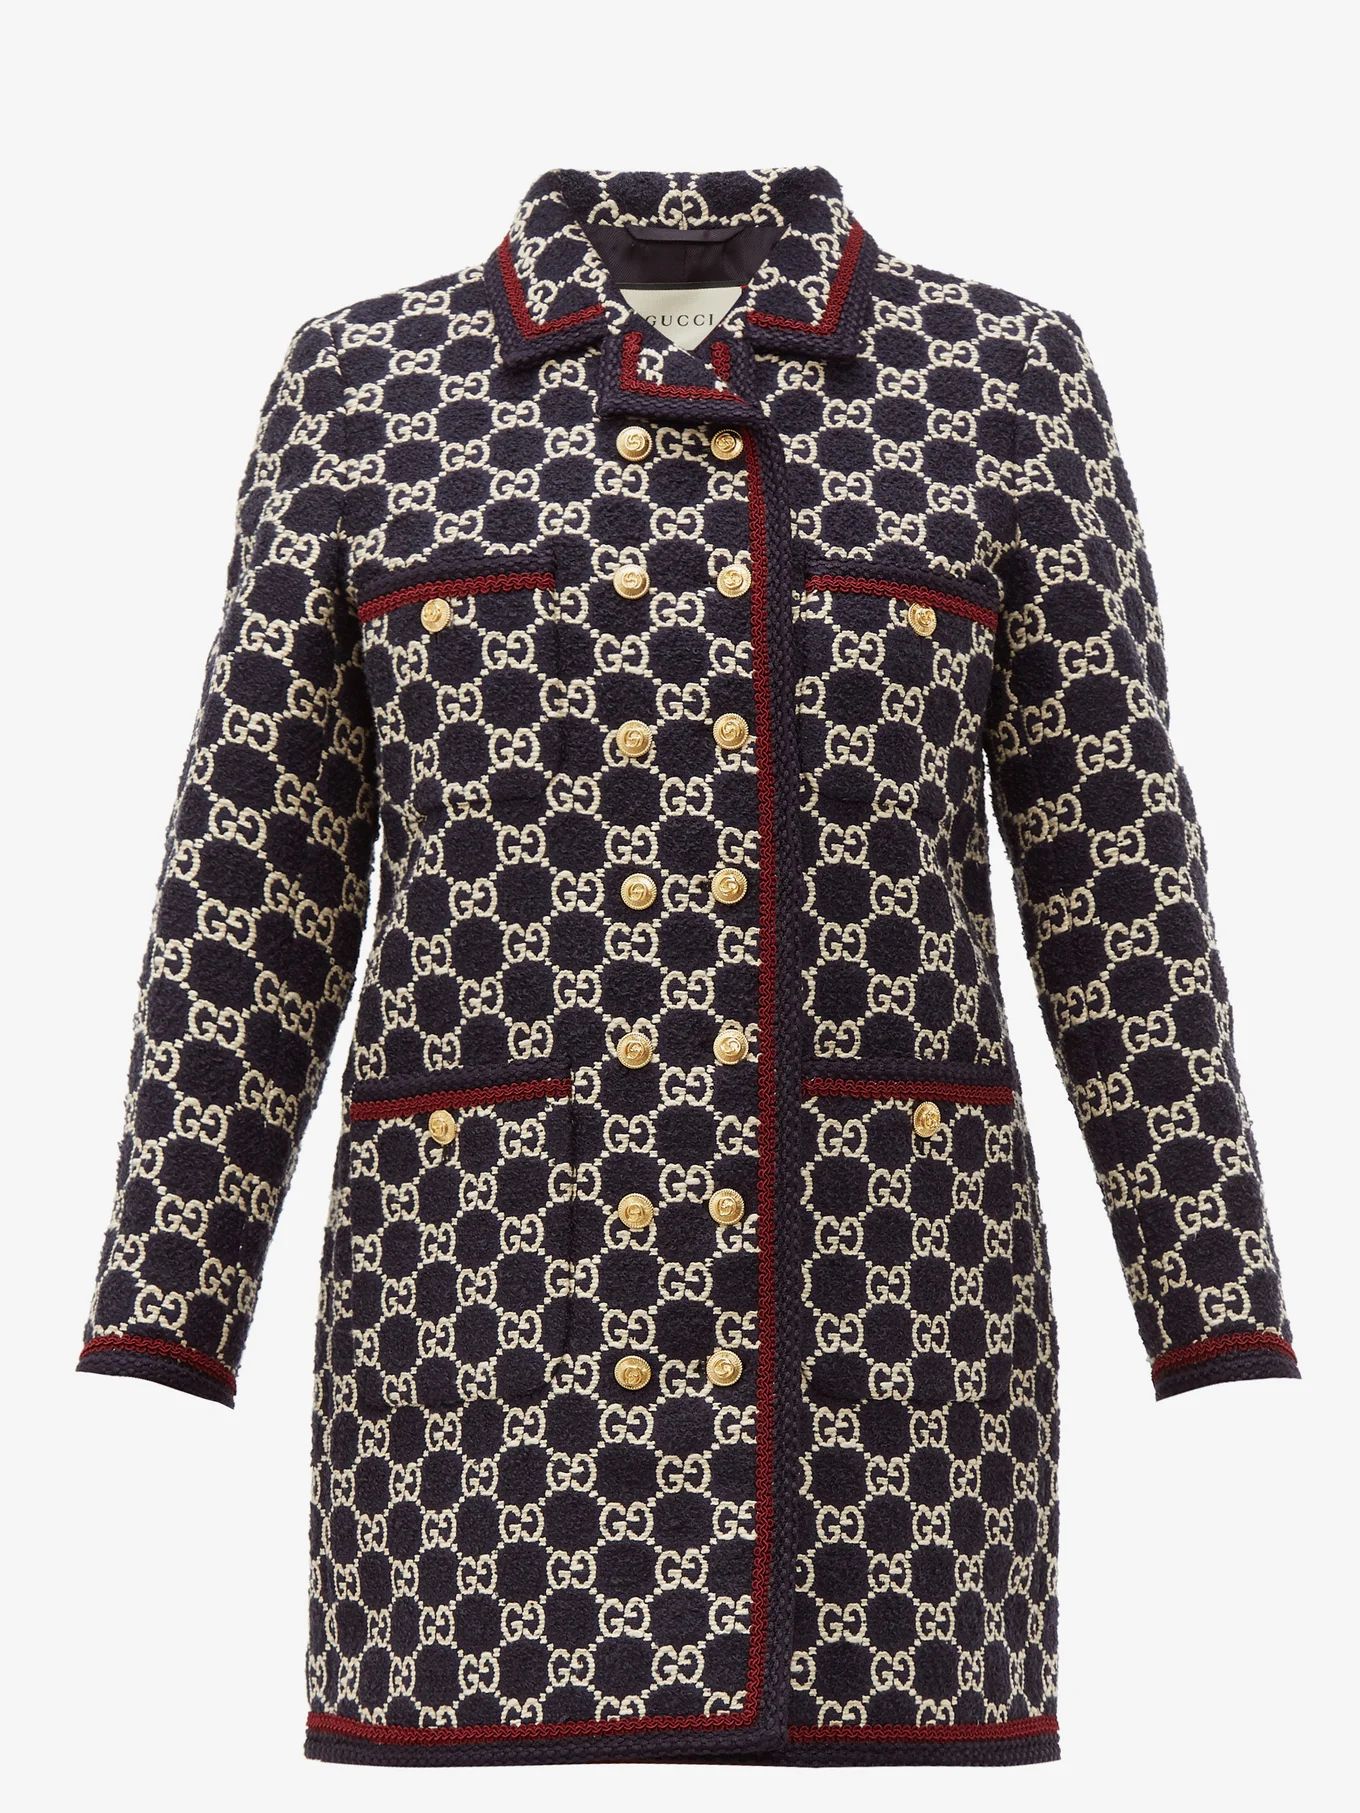 GG-jacquard tweed single-breasted coat | Matches (US)